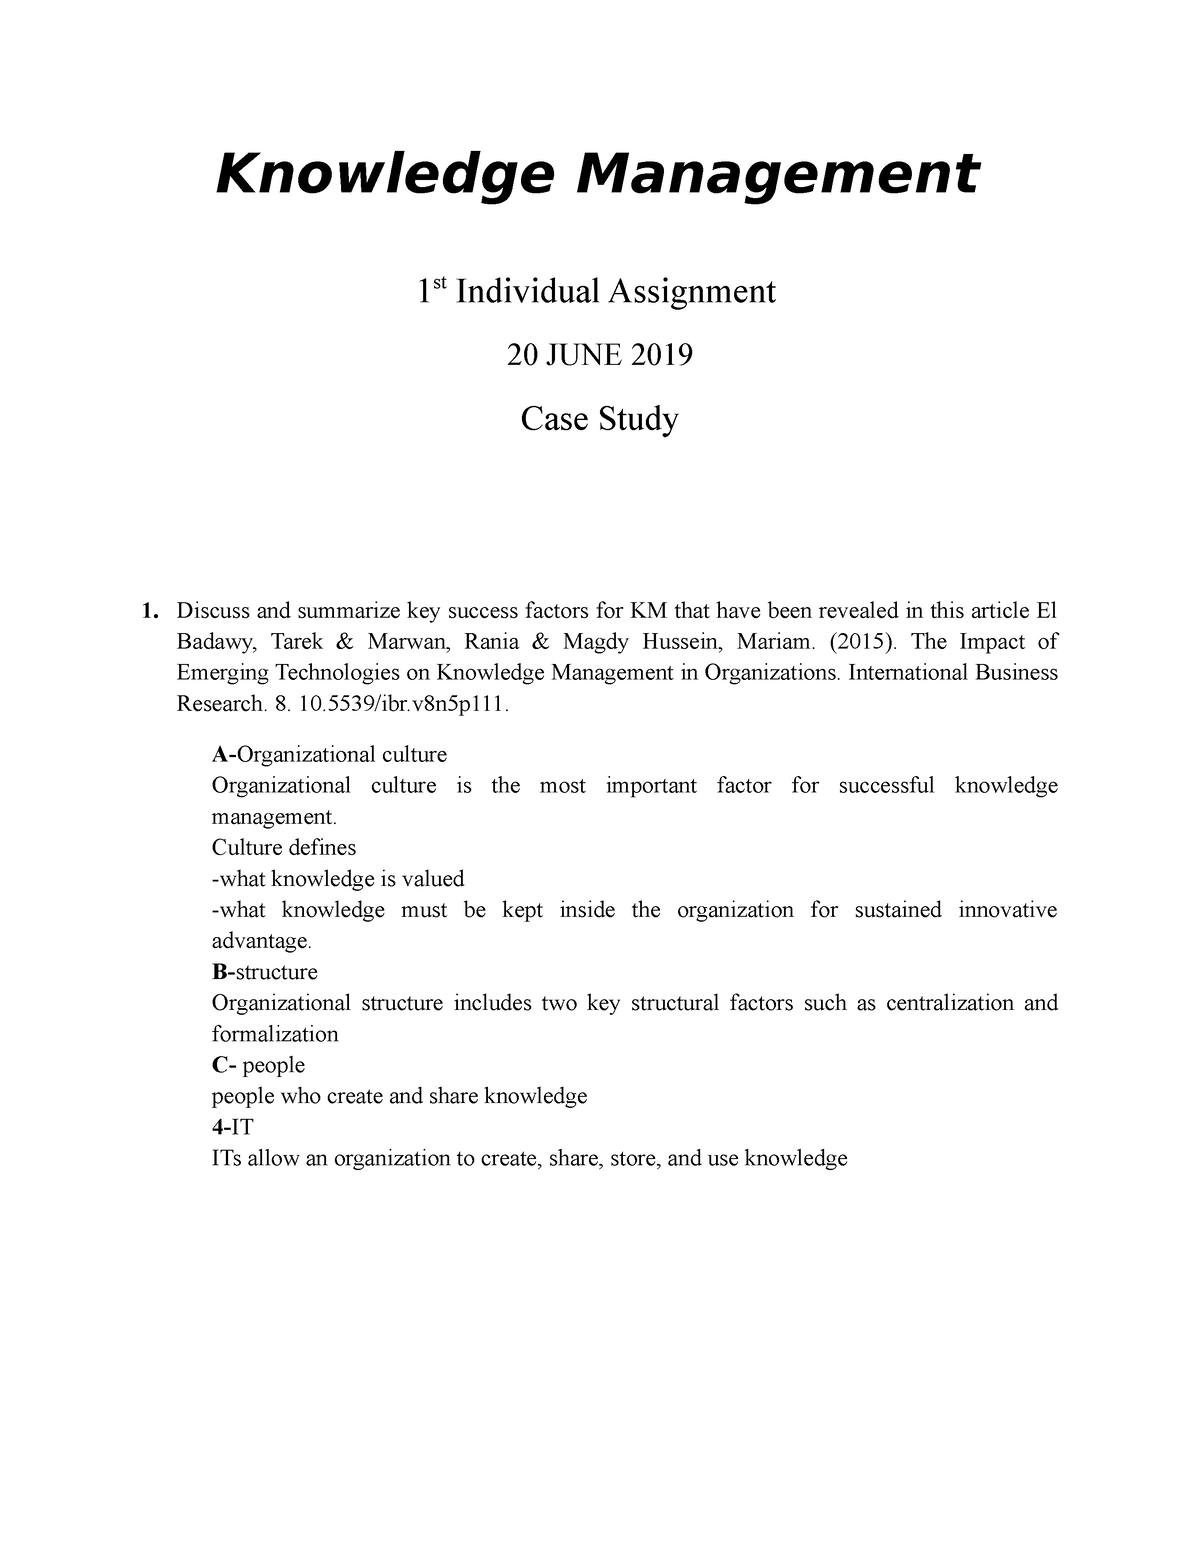 knowledge management case study with questions and answers